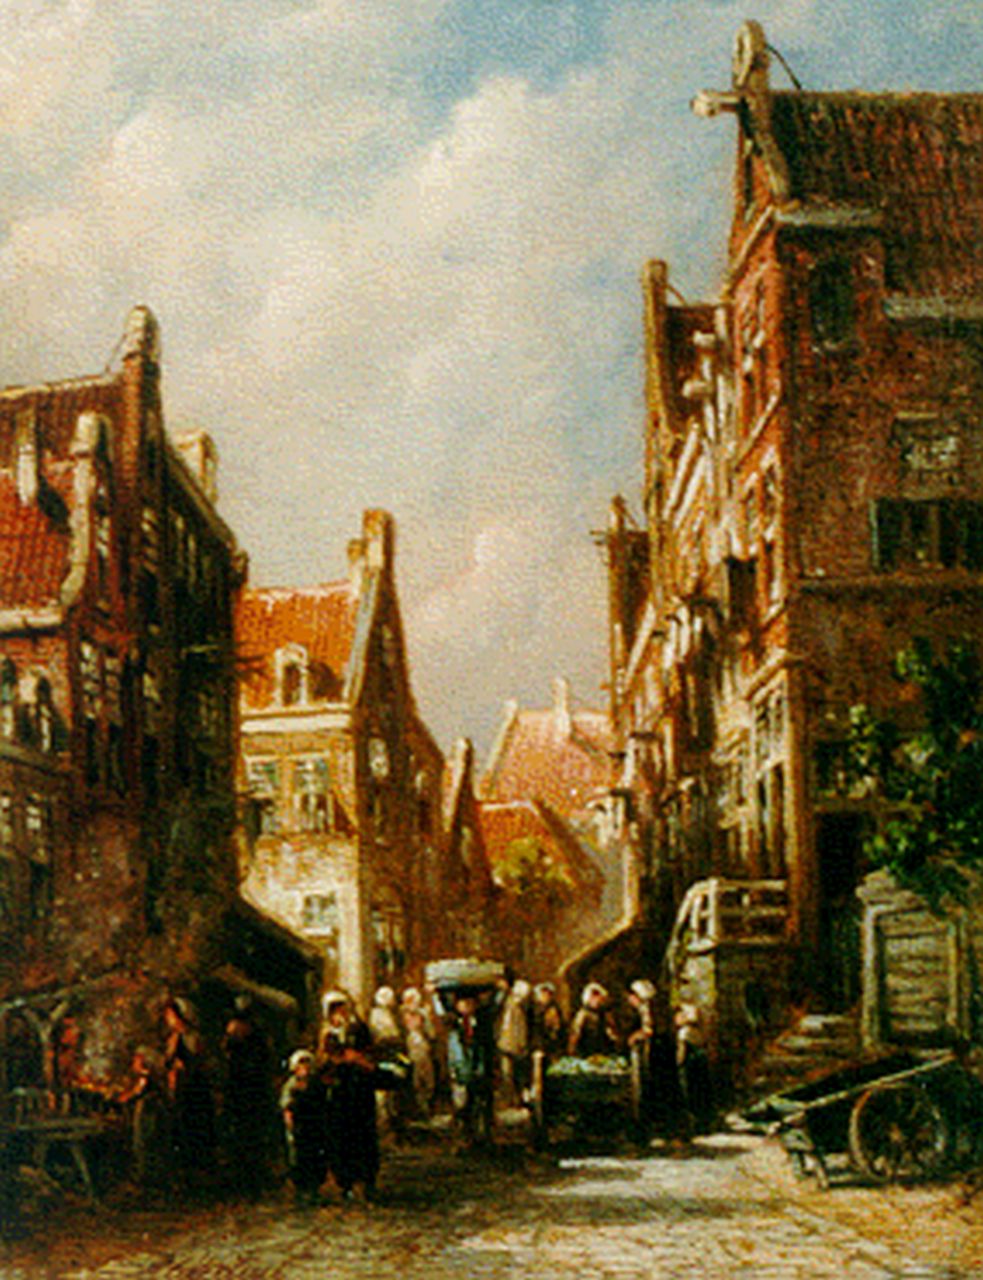 Vertin P.G.  | Petrus Gerardus Vertin, Daily activities in a Dutch town, oil on panel 19.4 x 14.9 cm, signed l.l.